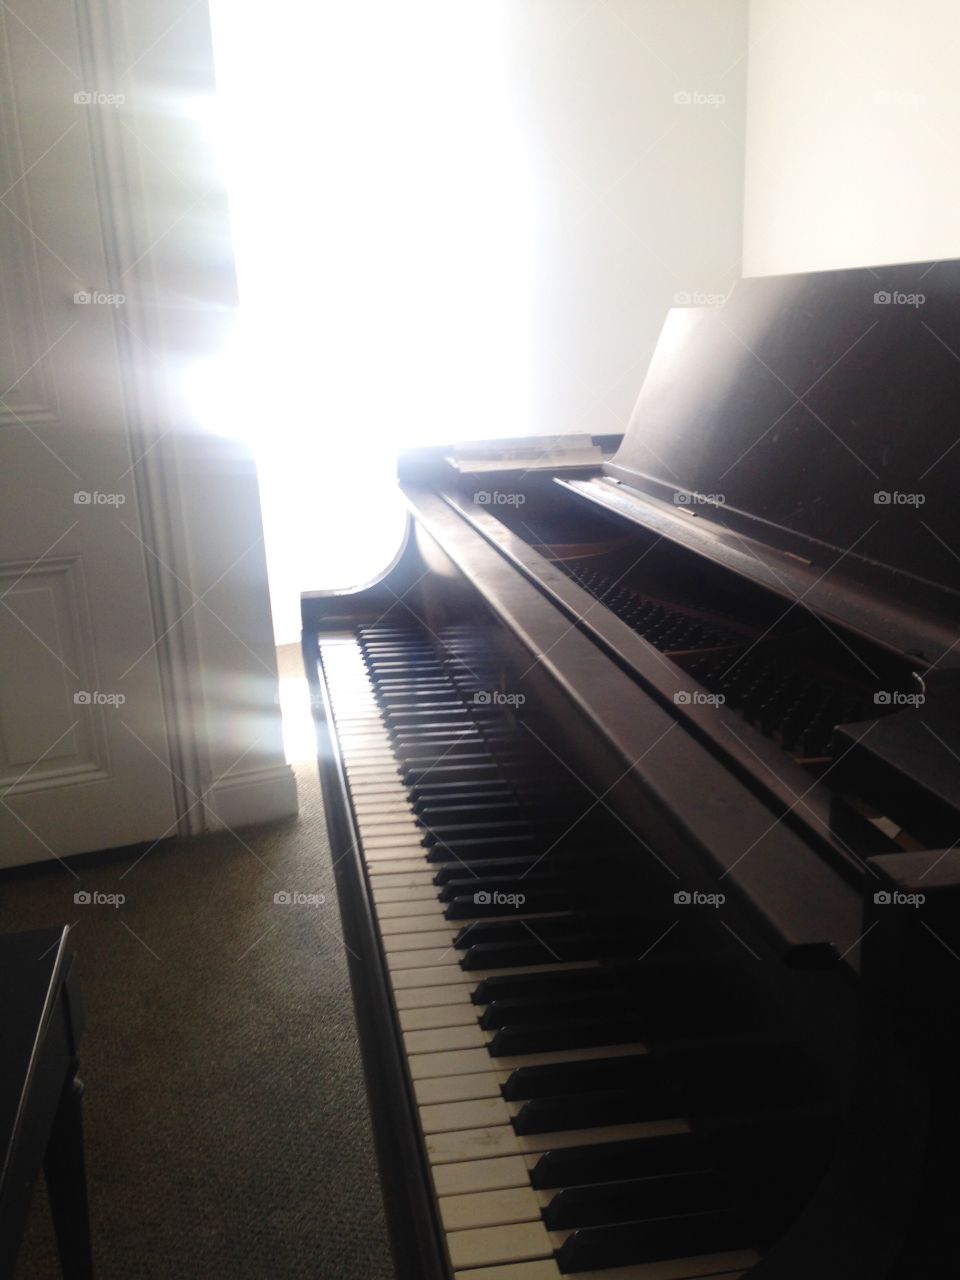 Piano in sunlight . Taken at the Academy of Vocal Arts in Philly